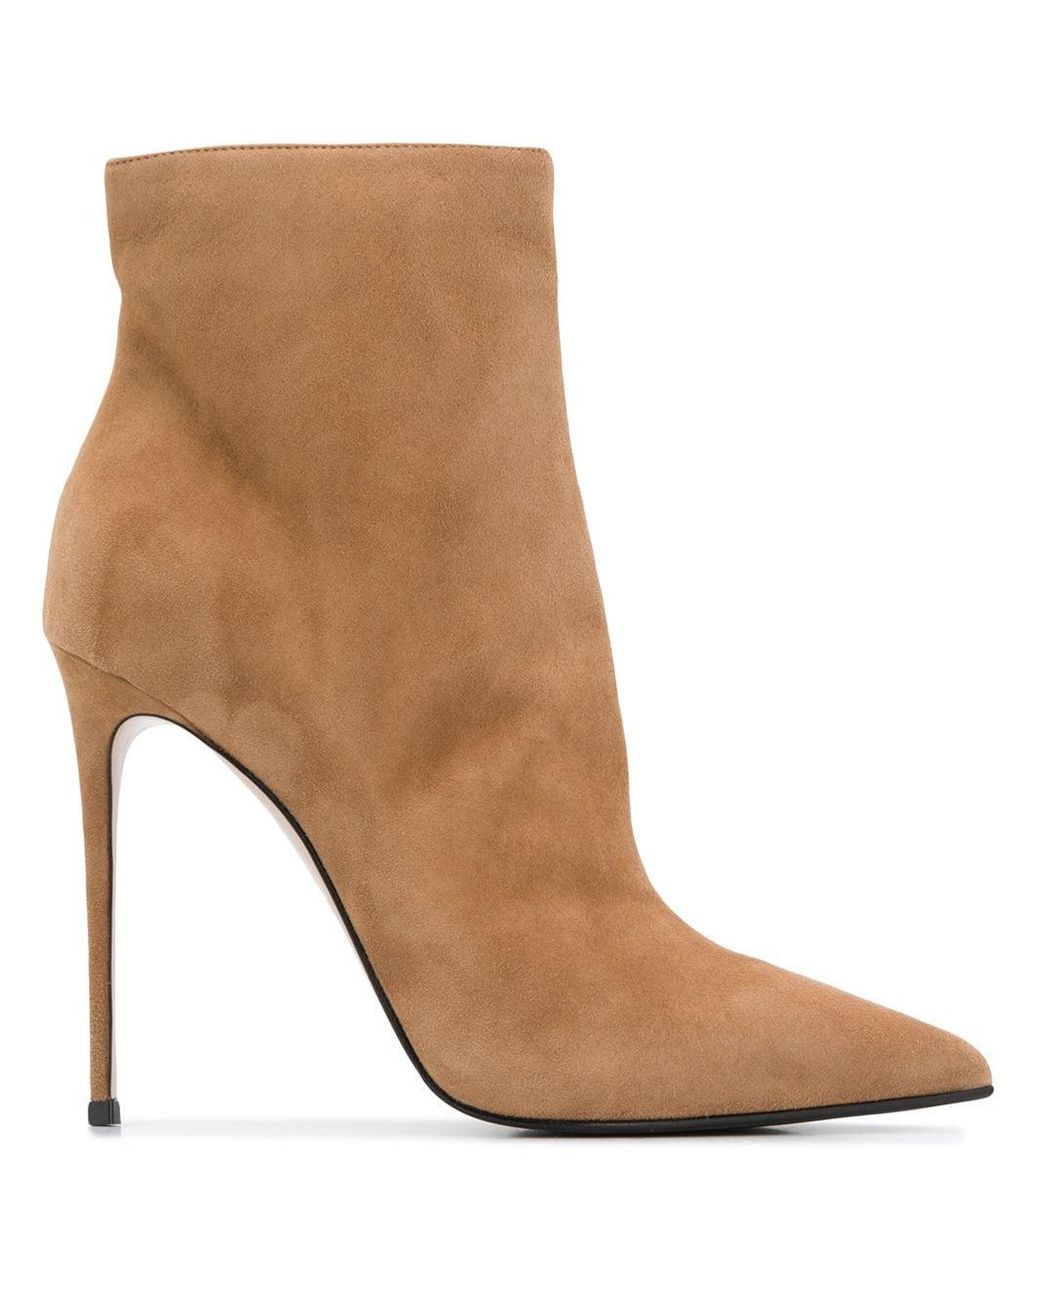 Le Silla Eva Suede Ankle Boots in Brown Lyst